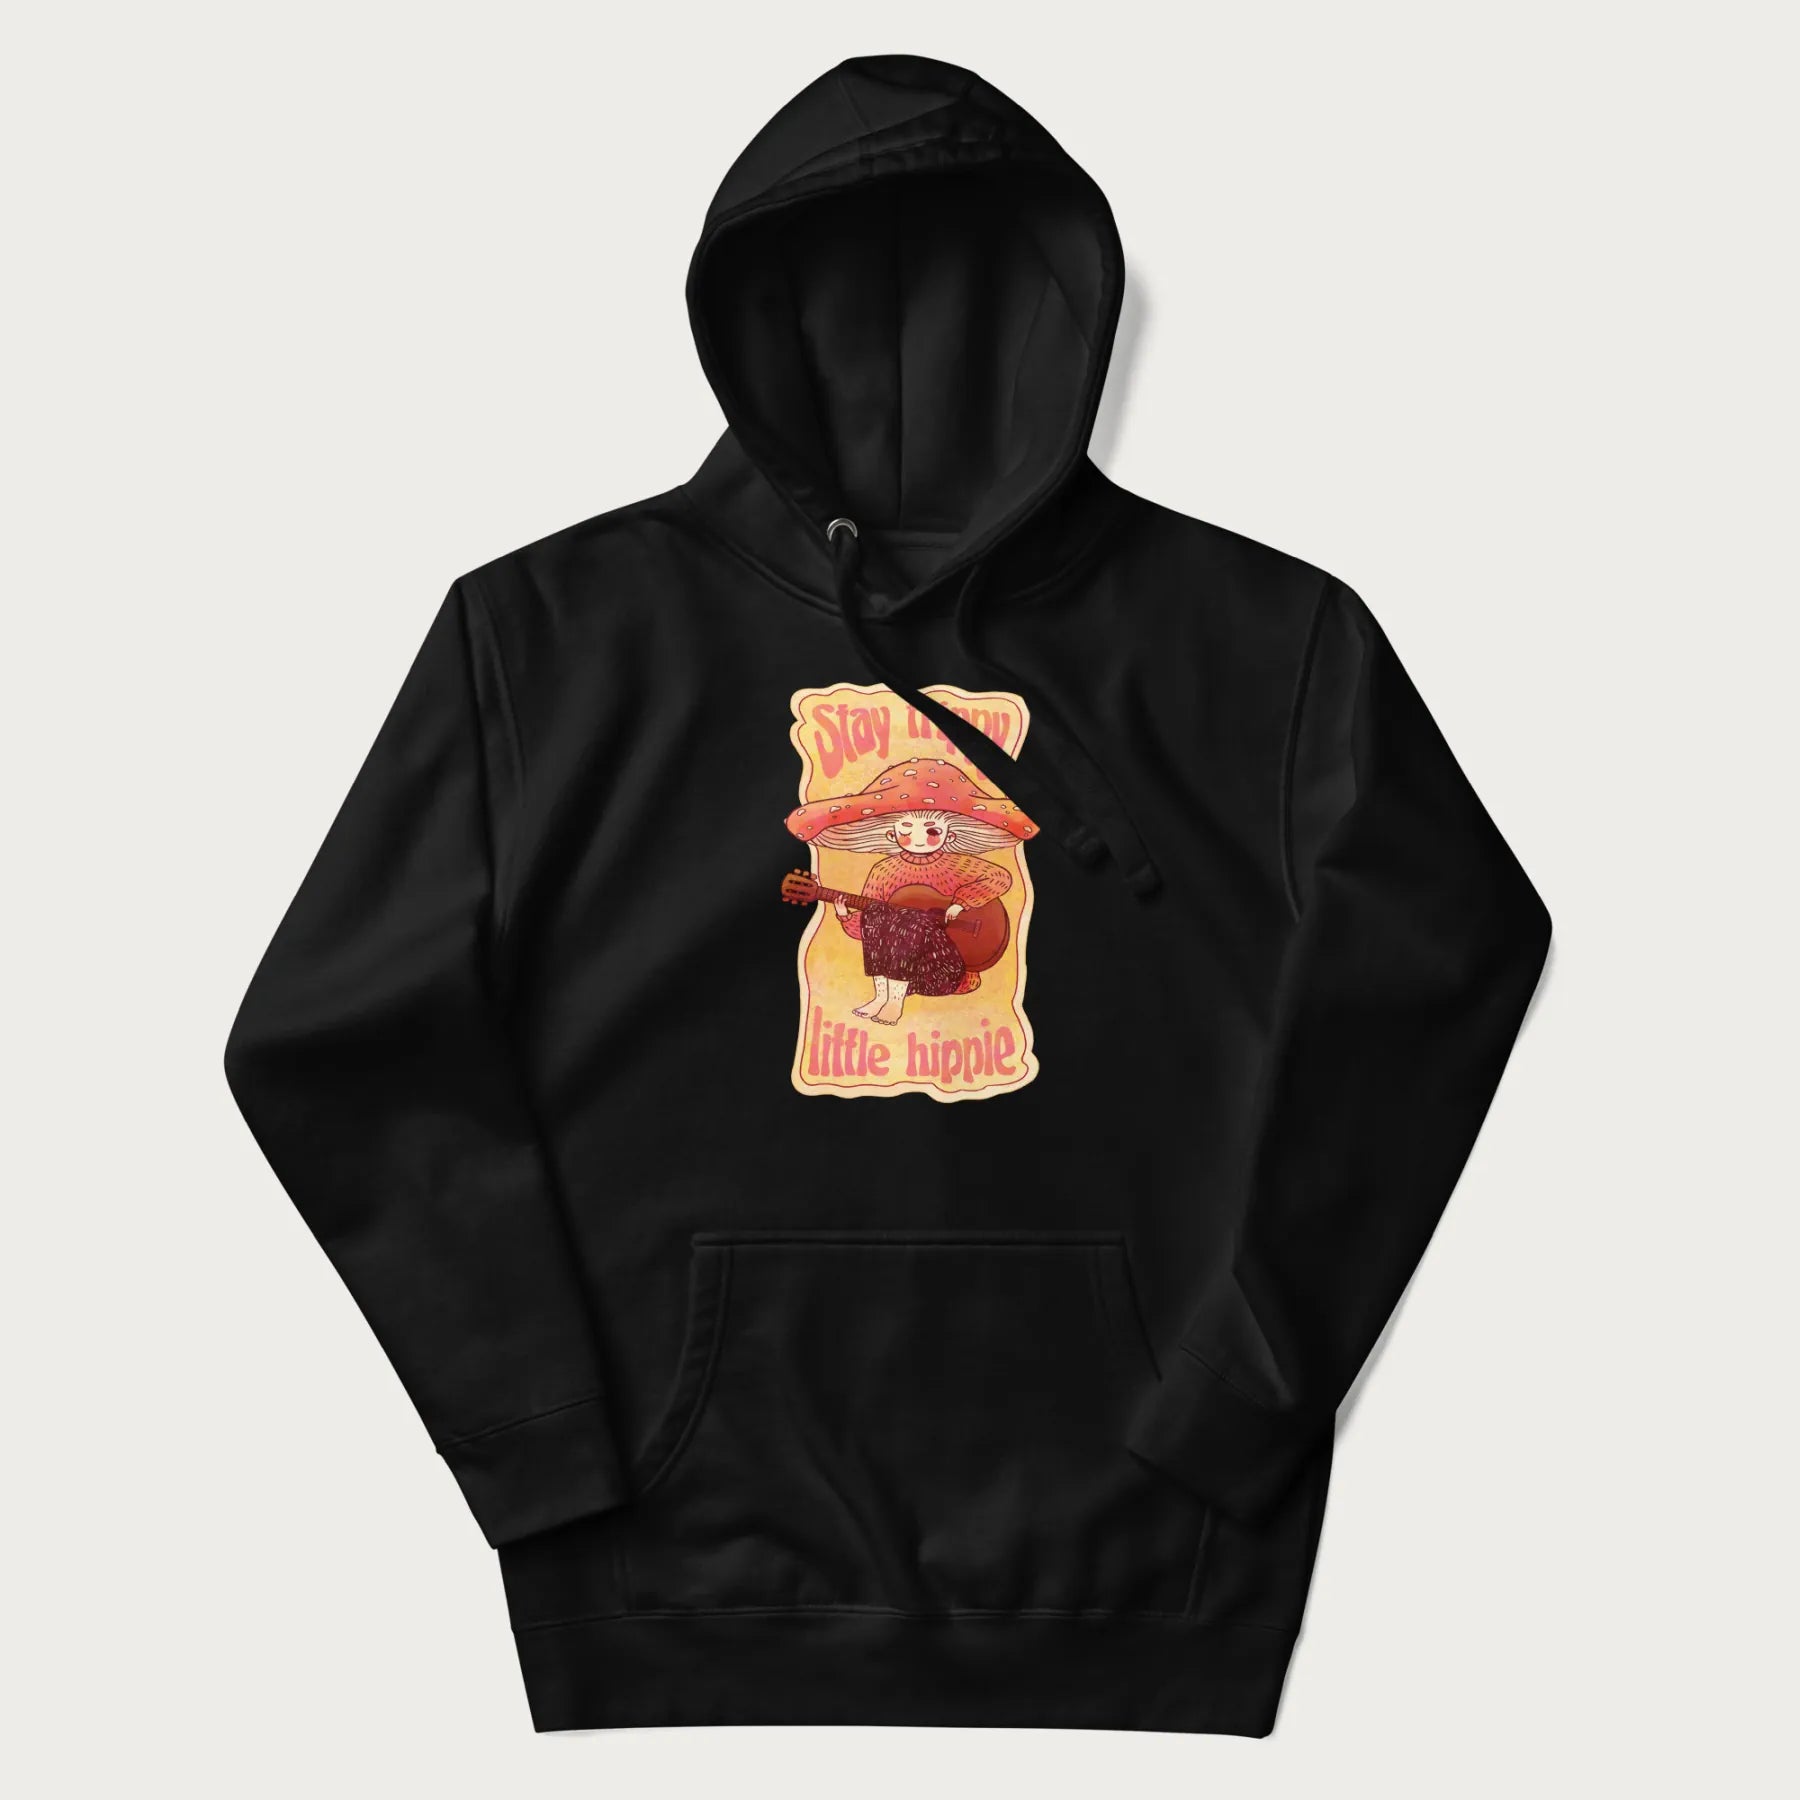 Black hoodie with a graphic of a character with a mushroom cap playing a guitar and the text 'Stay Trippy Little Hippie.'